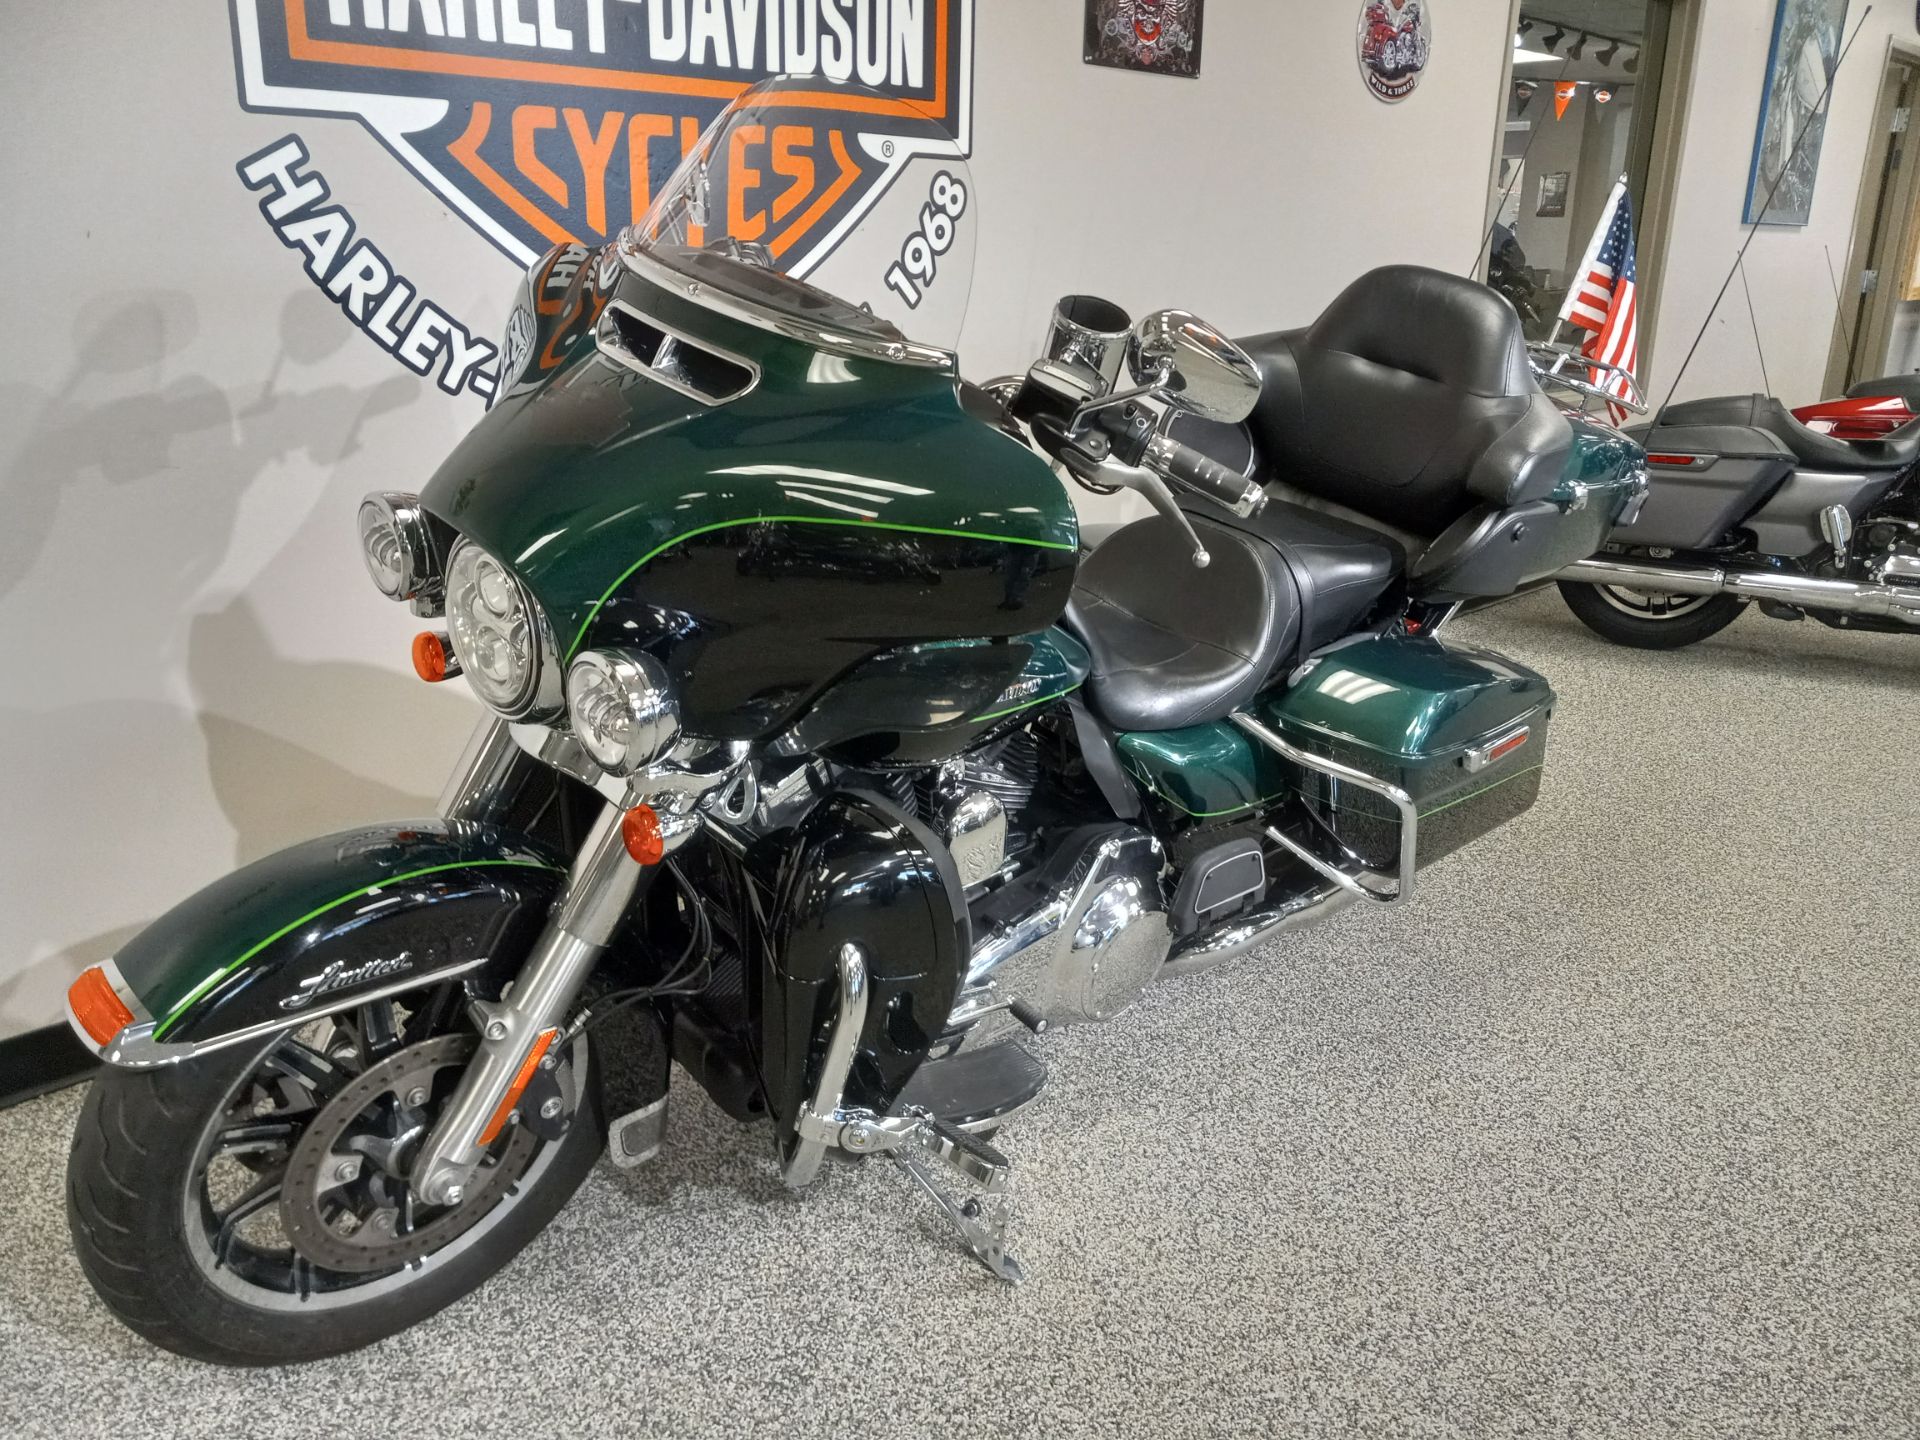 2015 Harley-Davidson Ultra Limited Low in Knoxville, Tennessee - Photo 14